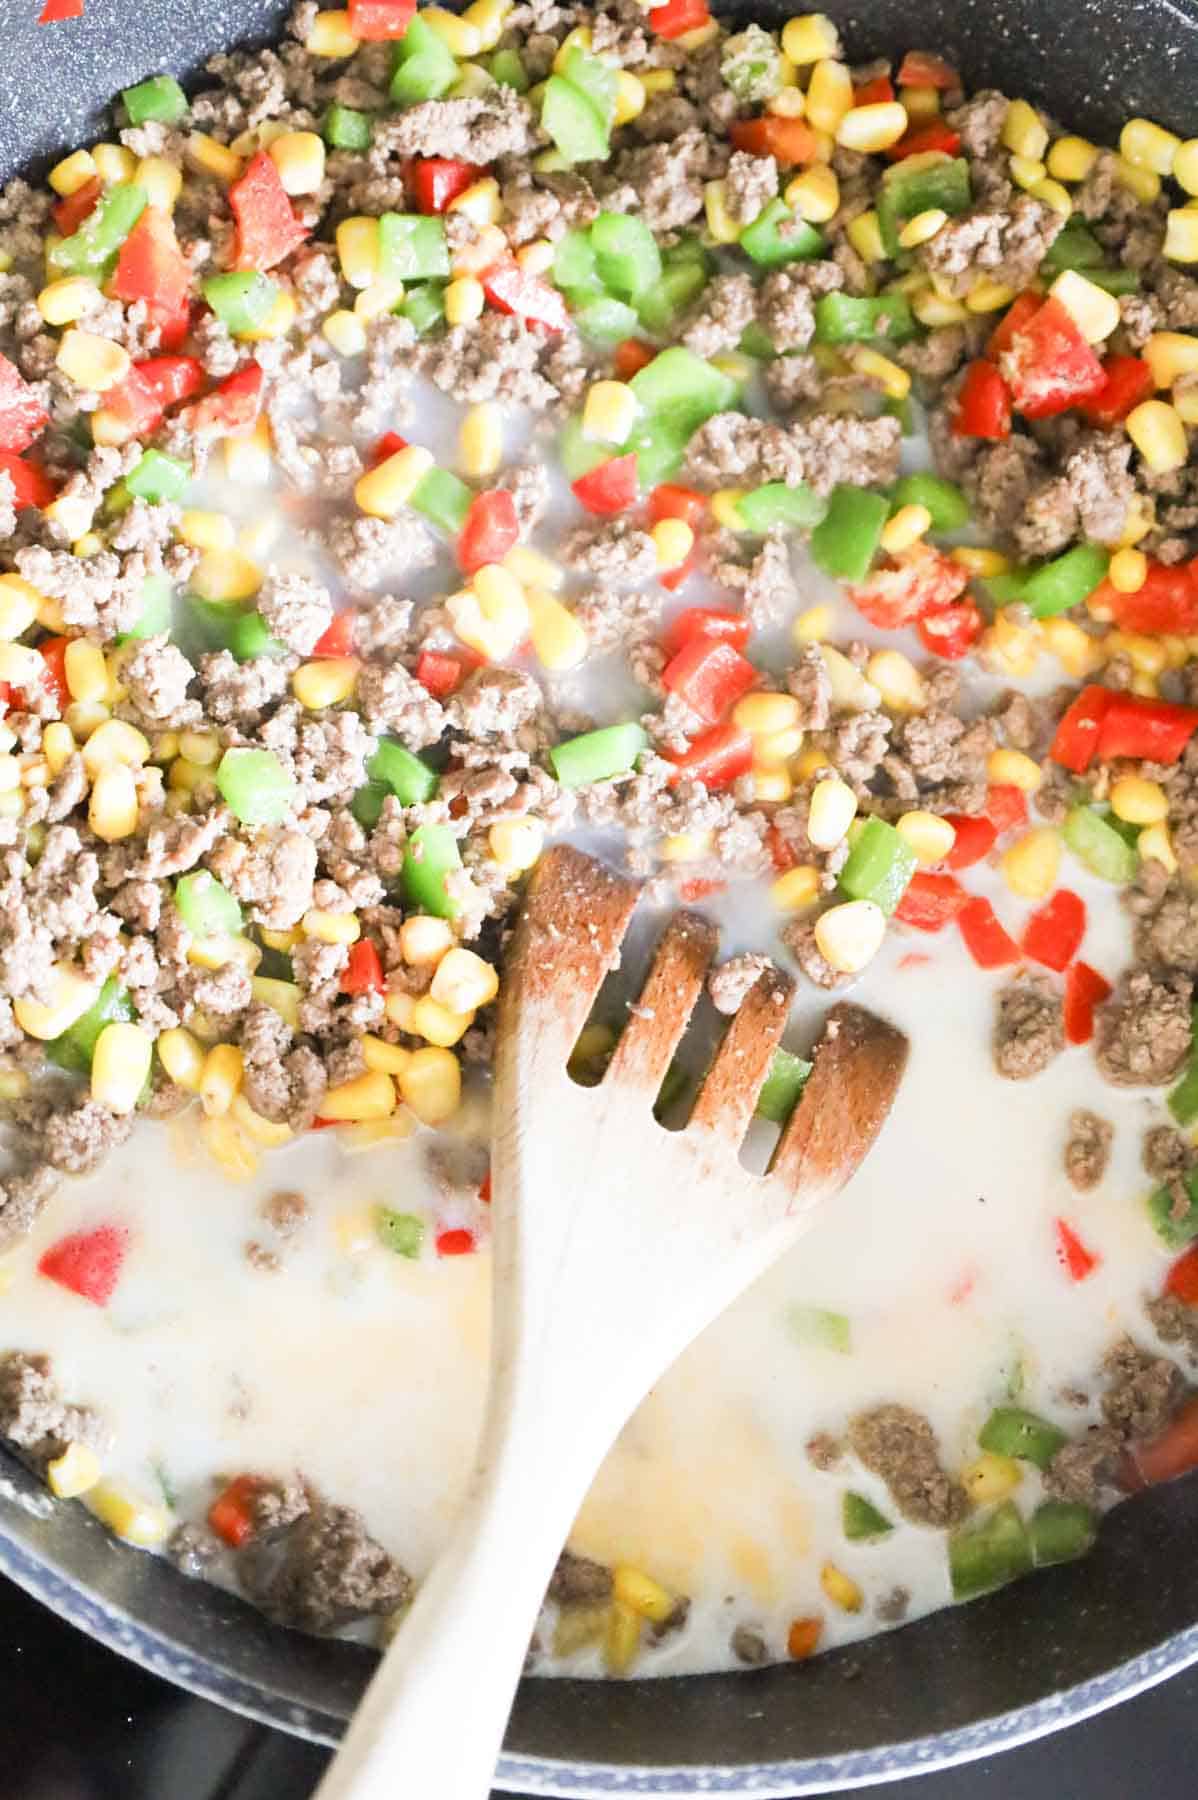 milk and water added to skillet with ground beef and veggie mixture